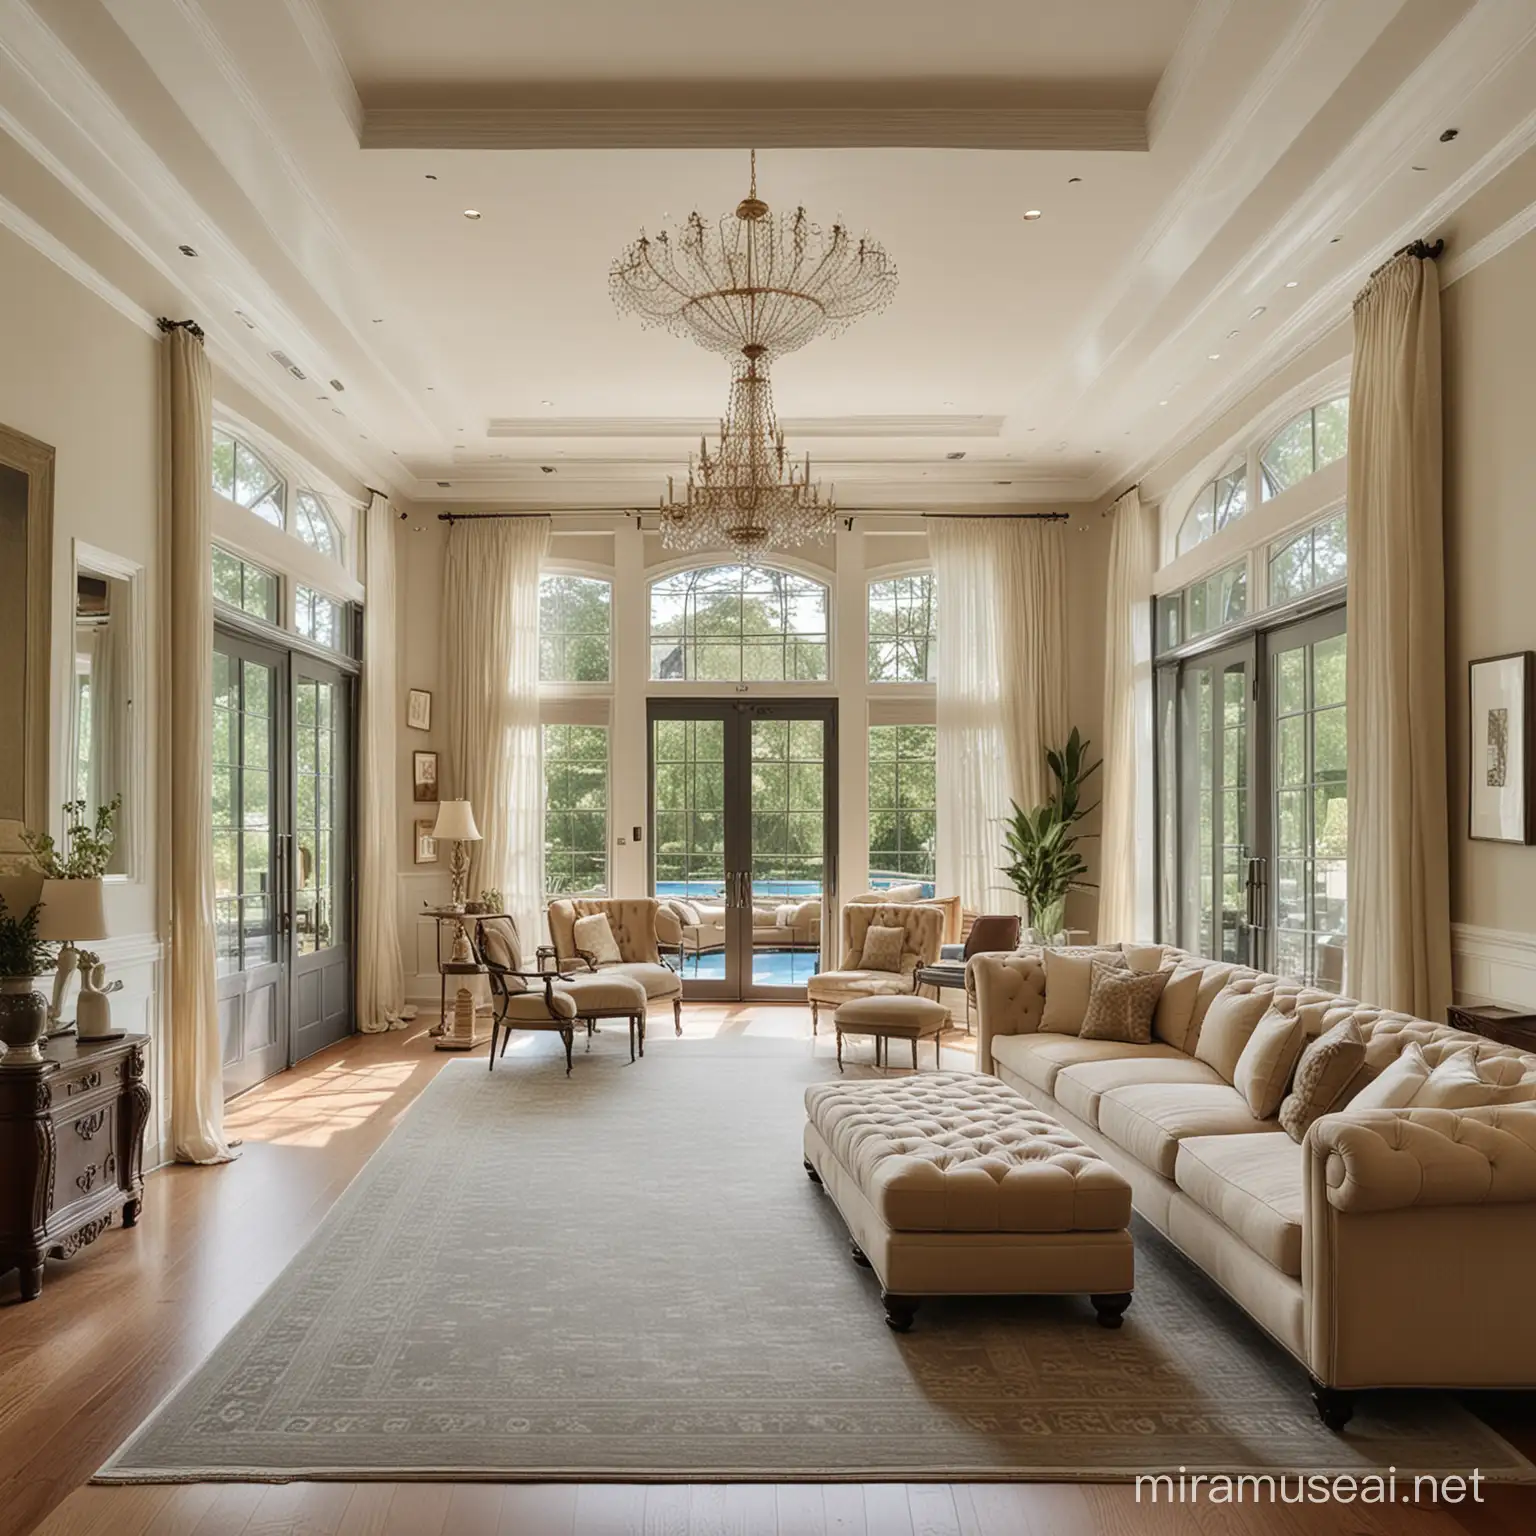 luxurious mansion with expensive decor; American old money; east coast architecture, pool and garden; luxury lounge